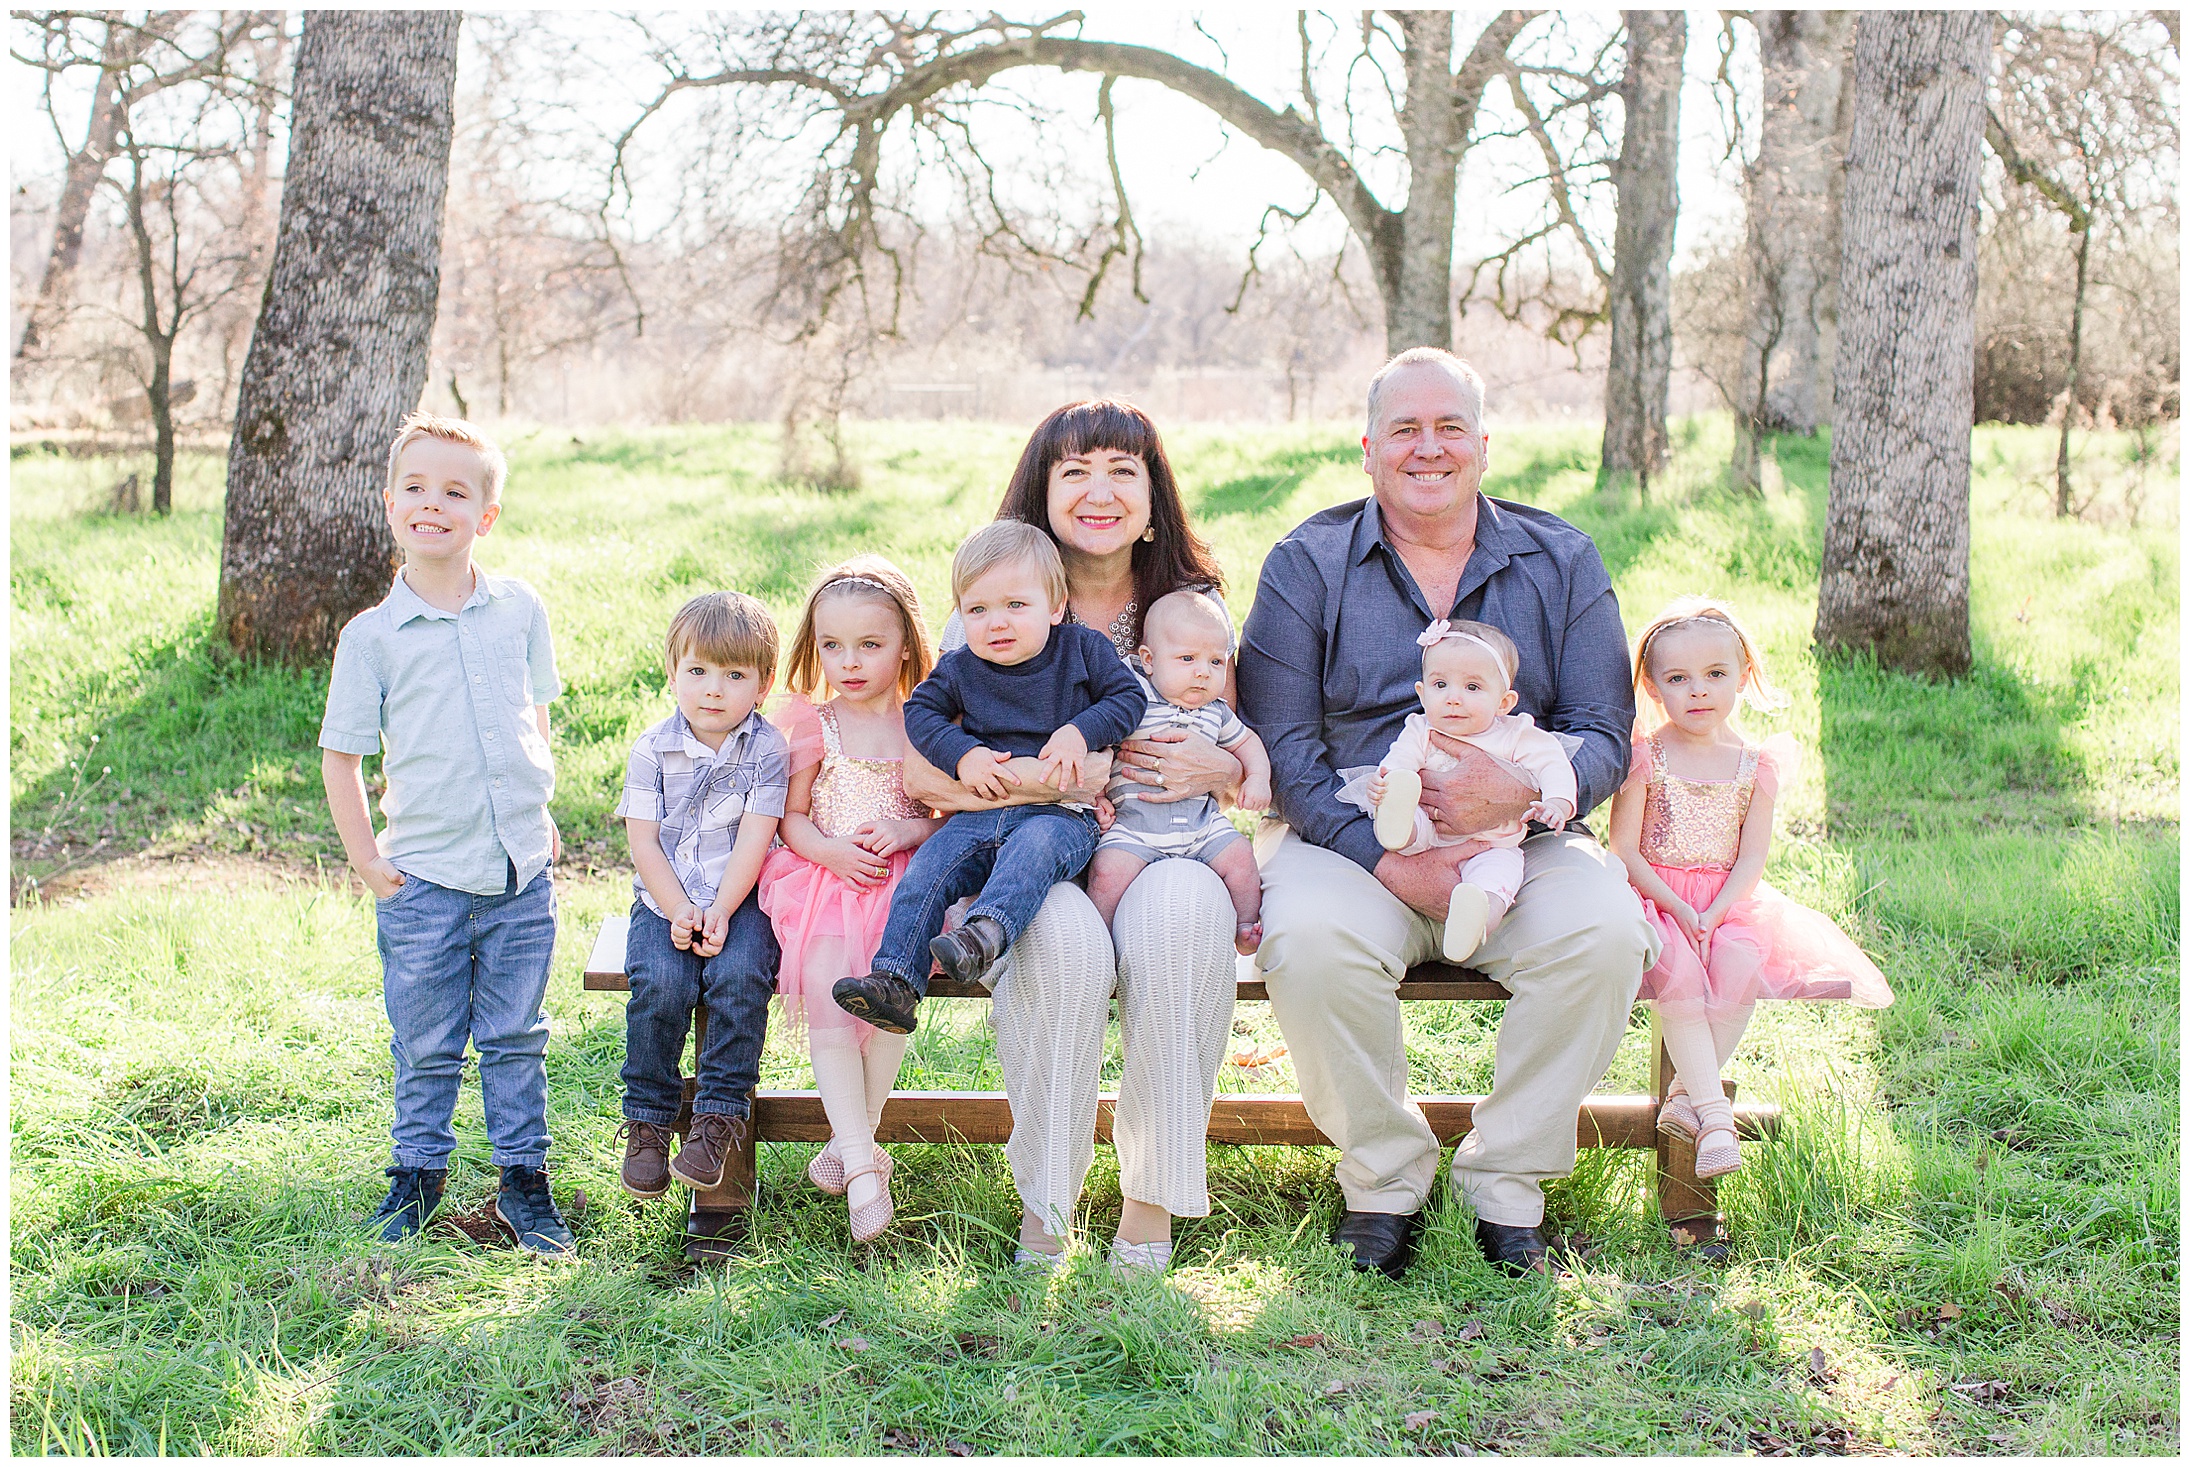 Large Extended Family Session Upper Bidwell Park Chico California Bench Blanket Grandparents,